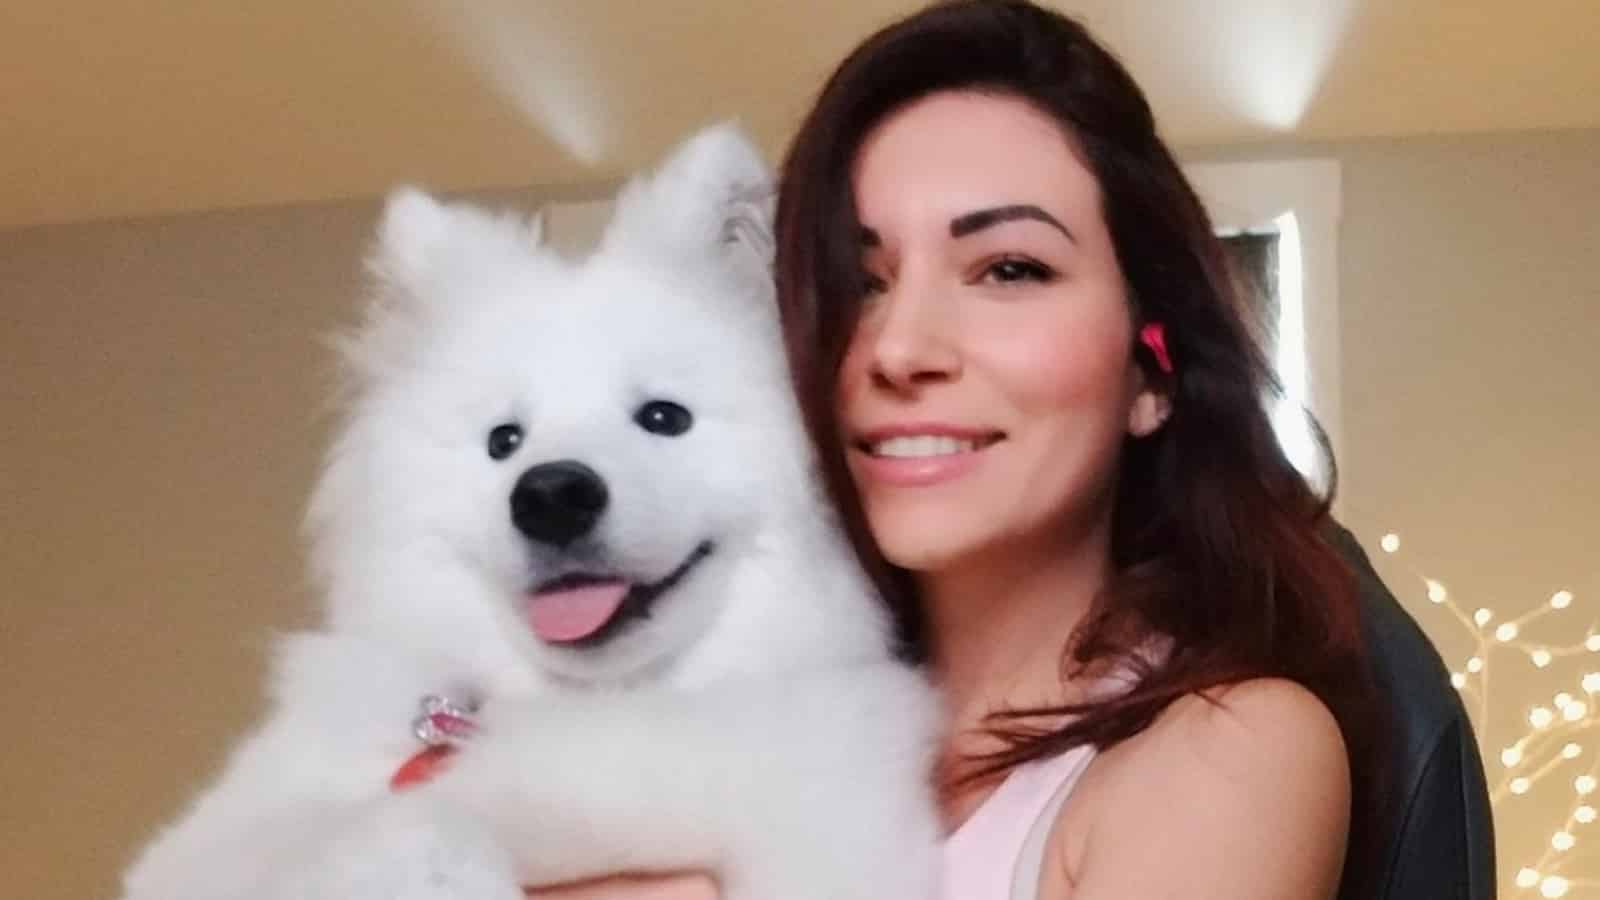 A screenshot of Alinity and her dog from Twitch.